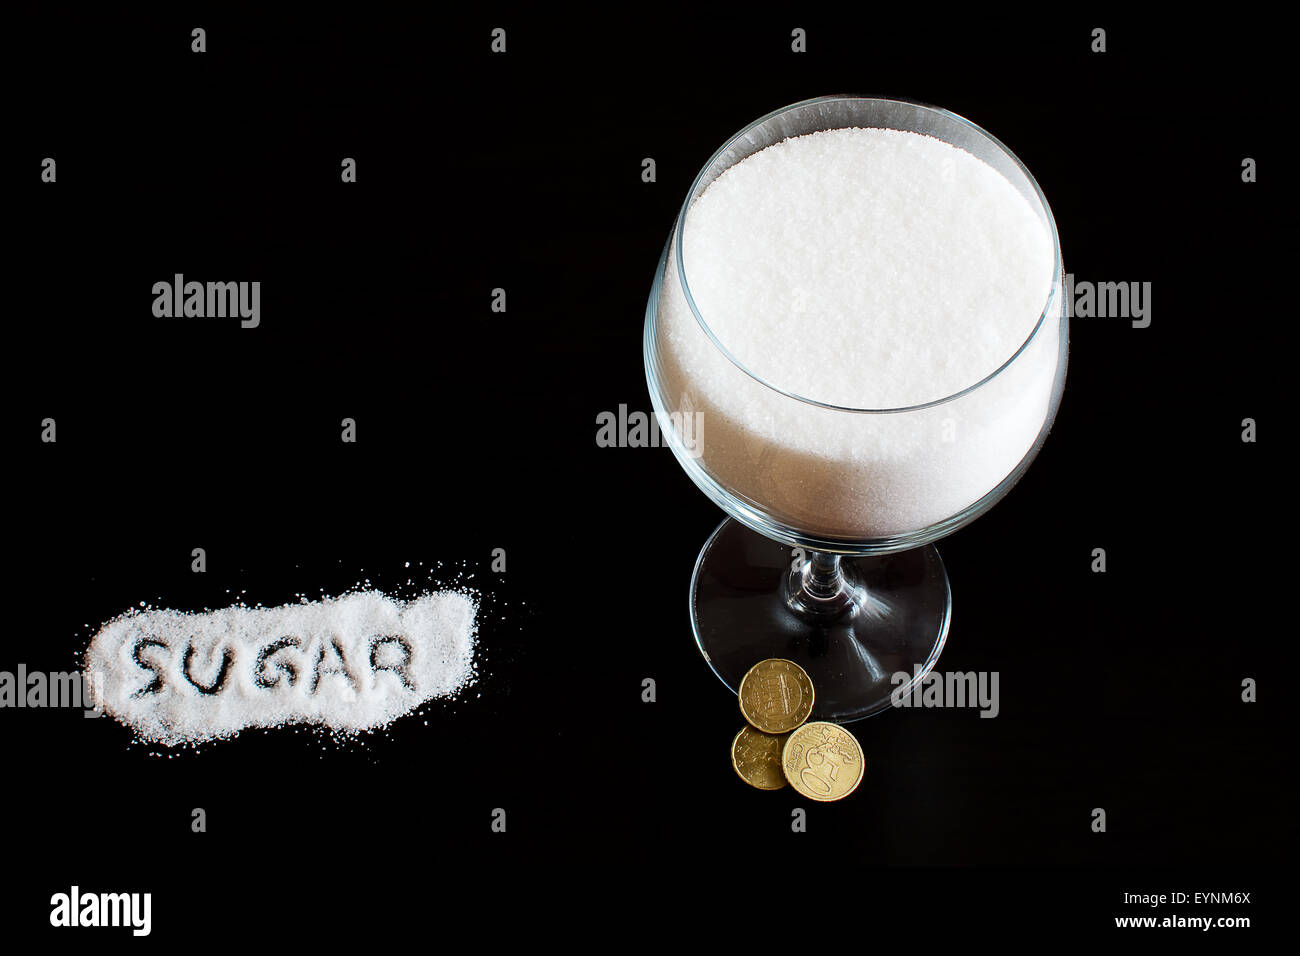 A cup of sugar and its cost Stock Photo